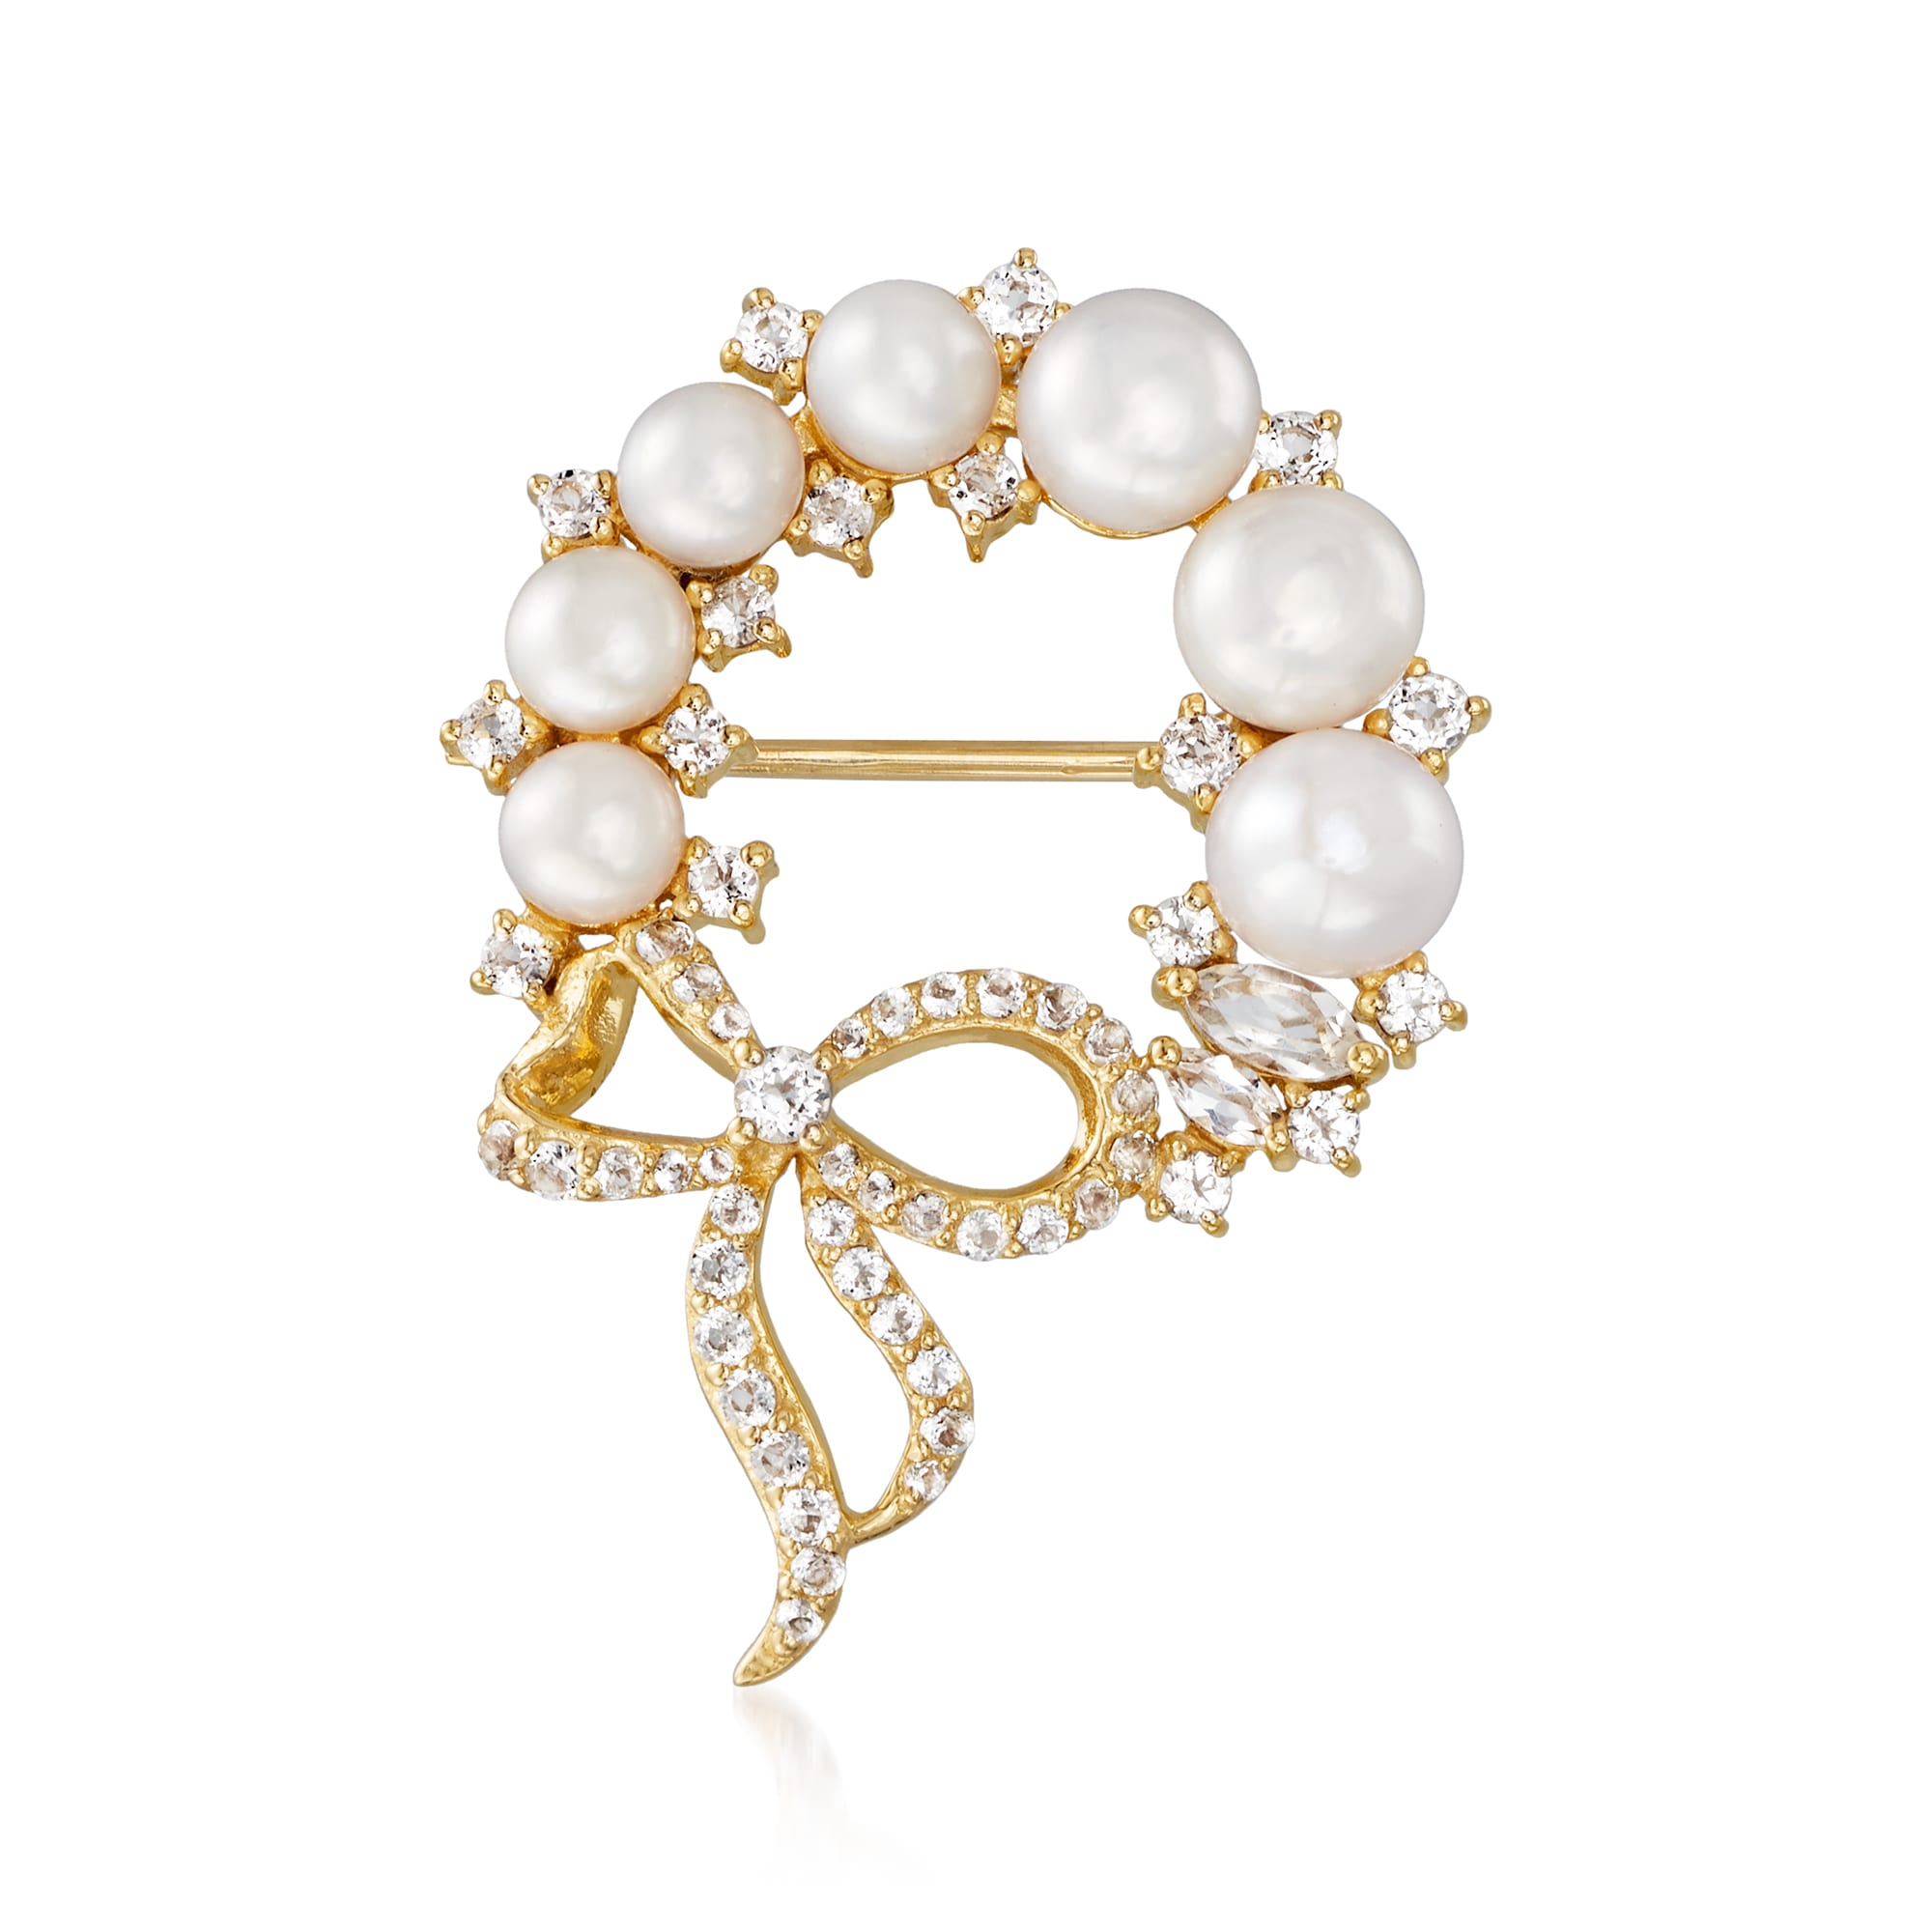 4-5mm Cultured Pearl and .76 ct. t.w. White Topaz Wreath Pin in 18kt ...